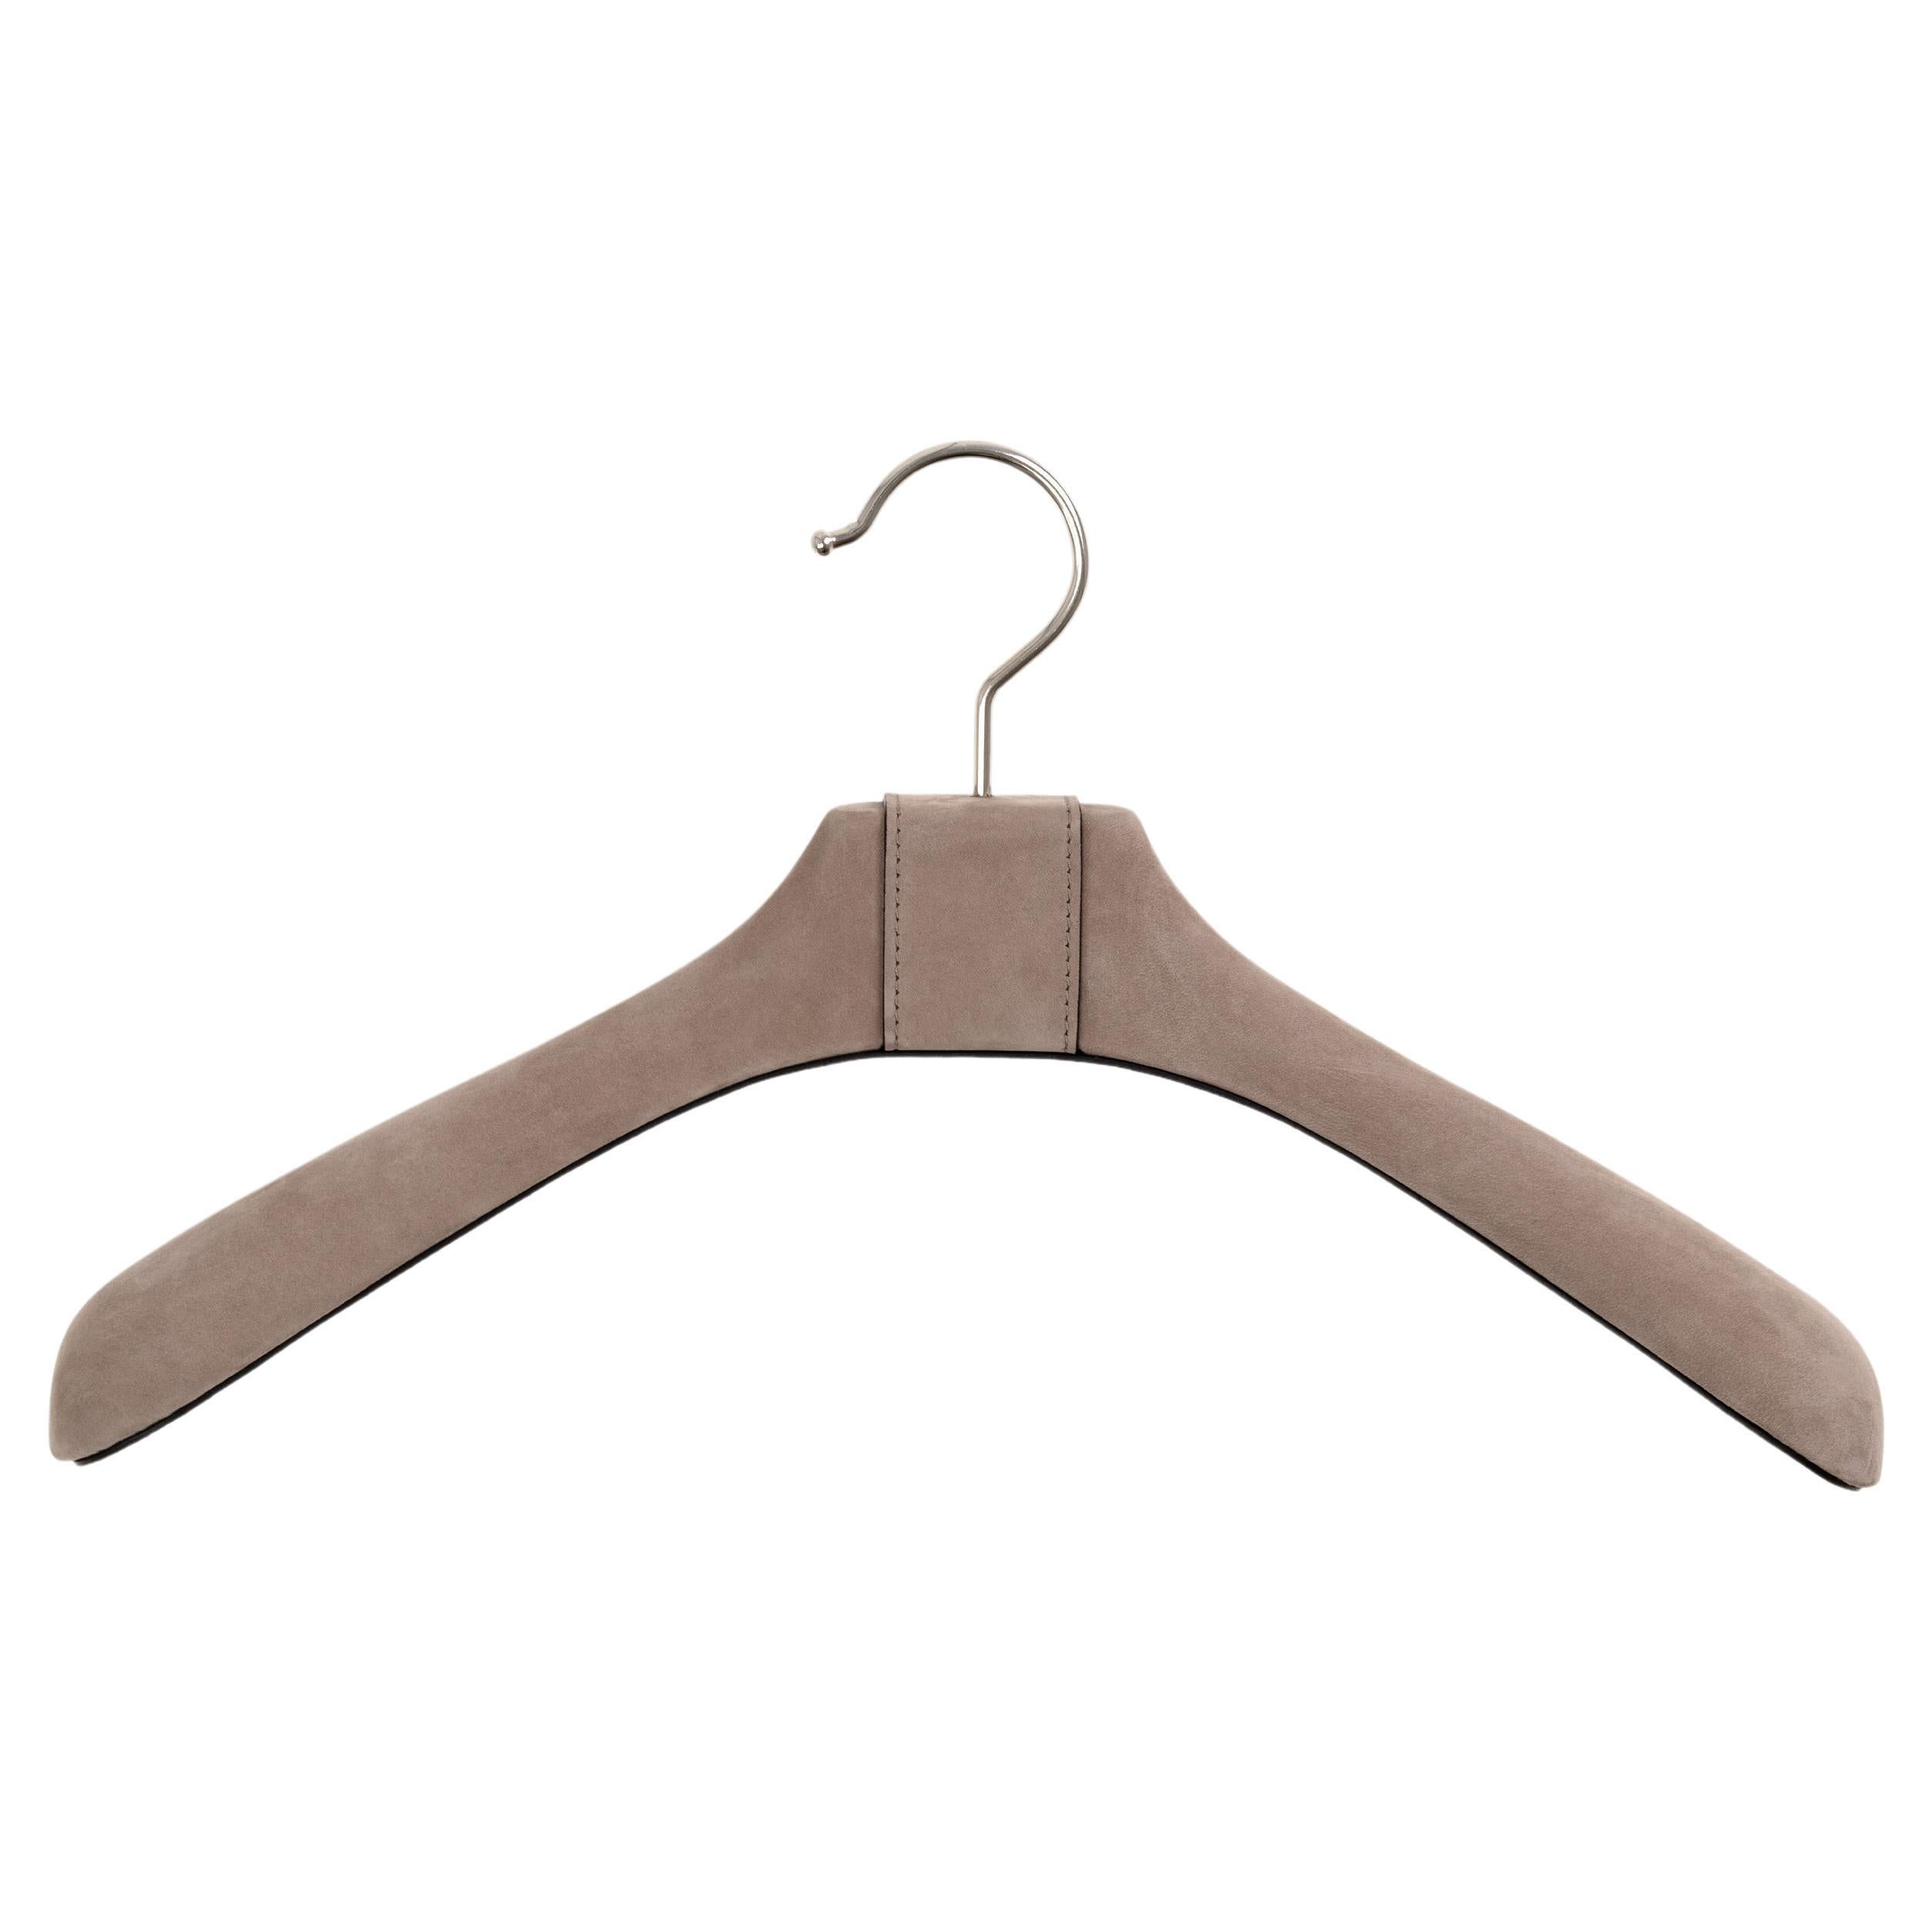 https://a.1stdibscdn.com/21st-century-coat-hanger-full-covered-in-real-leather-handcrafted-in-italy-for-sale/f_59351/f_270577821684749806203/f_27057782_1684749806878_bg_processed.jpg